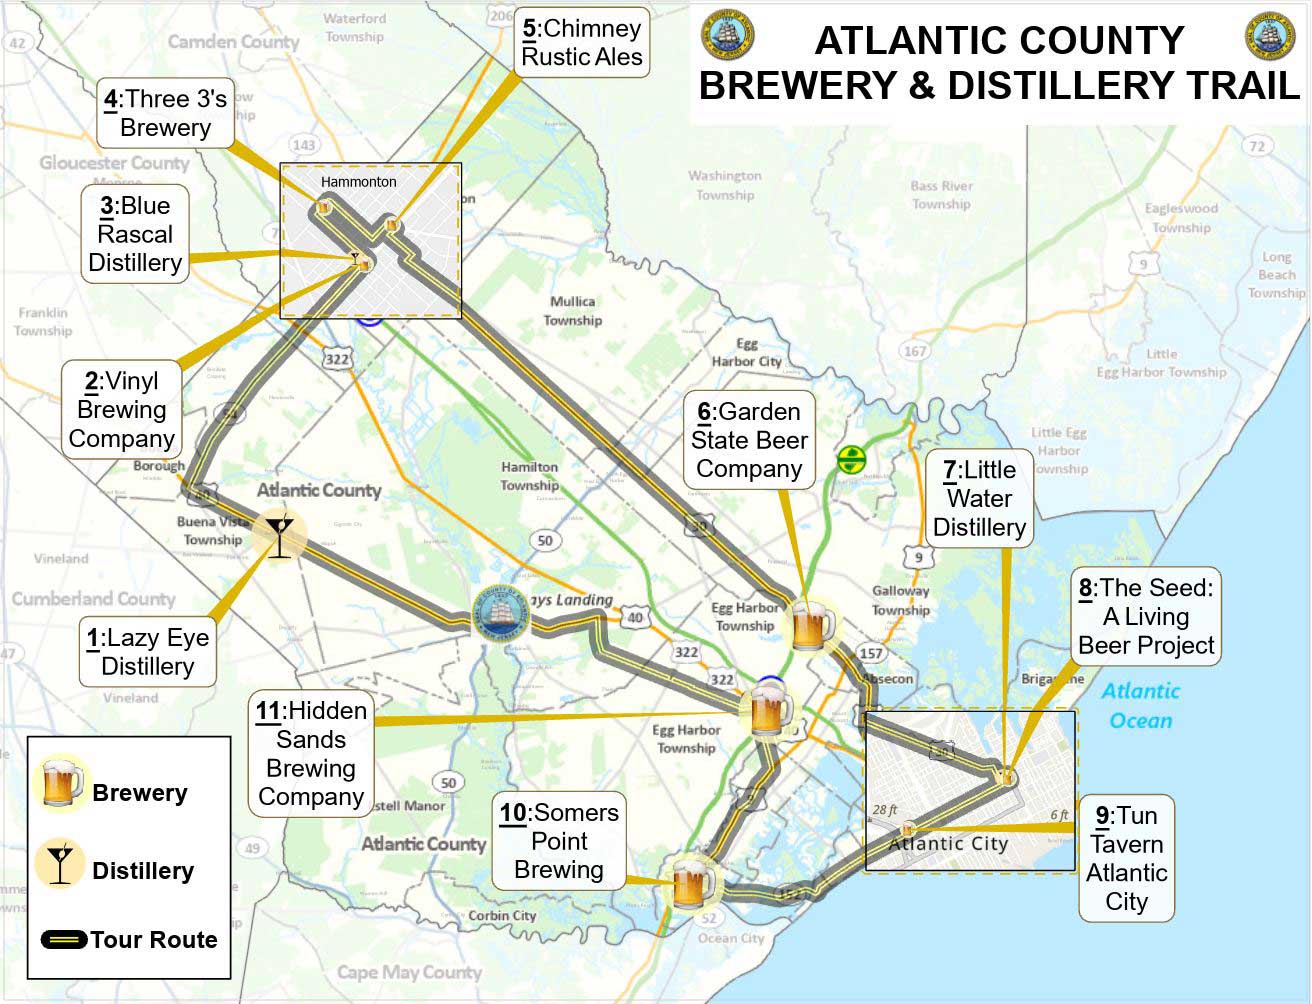 Atlantic County Brewery & Distillery Trail
Map shows a round "trail" to take to hit all of the breweries and distilleries in Atlantic County.